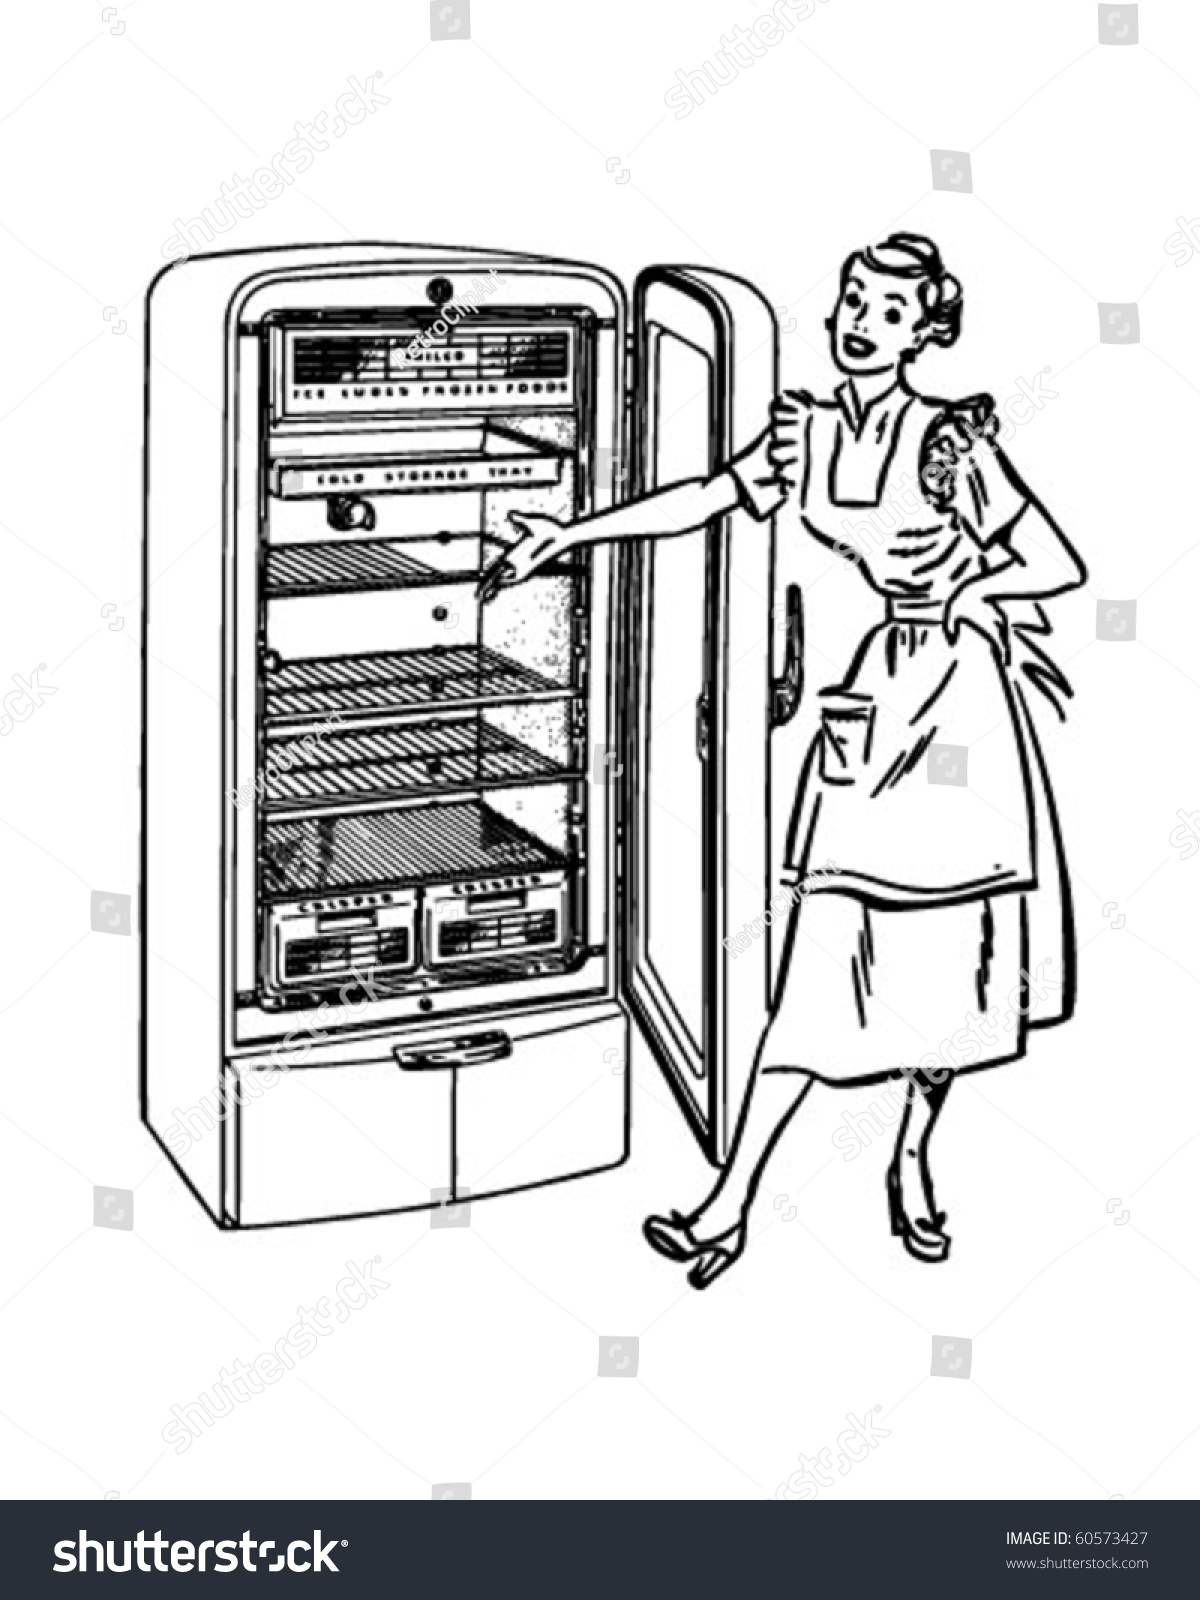 free clipart images refrigerator - photo #35